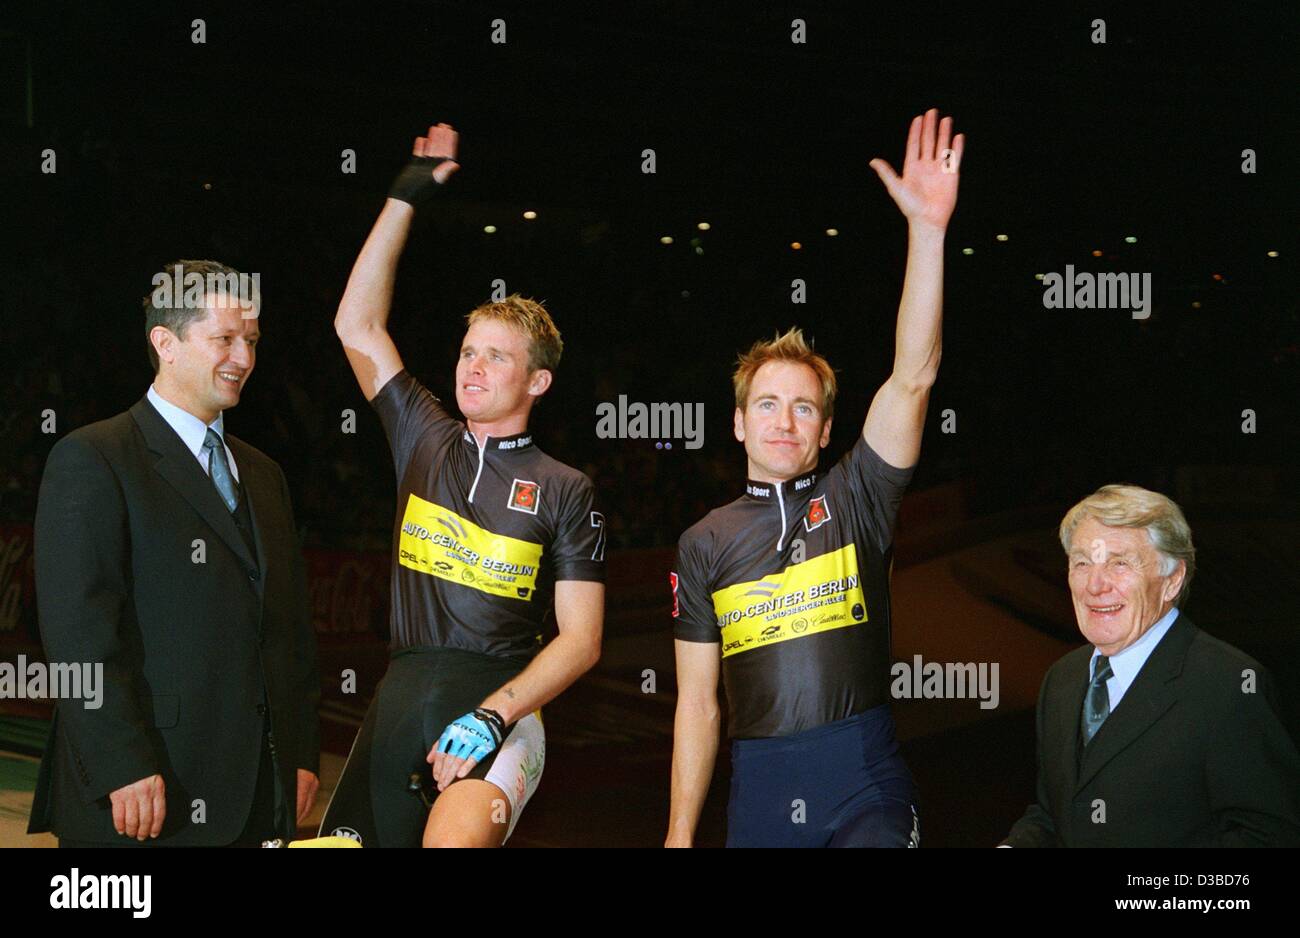 (dpa) -  Australian cyclist Scott McGrory (2nd from R) and his Belgian partner Matthew Gilmore (2nd from L), the winners of the 39th Six Days of Munich race, wave their hands and are introduced to the spectators of the event by the sports directors Otto Ziege (R) and Dieter Stein (L) at the Six Days Stock Photo